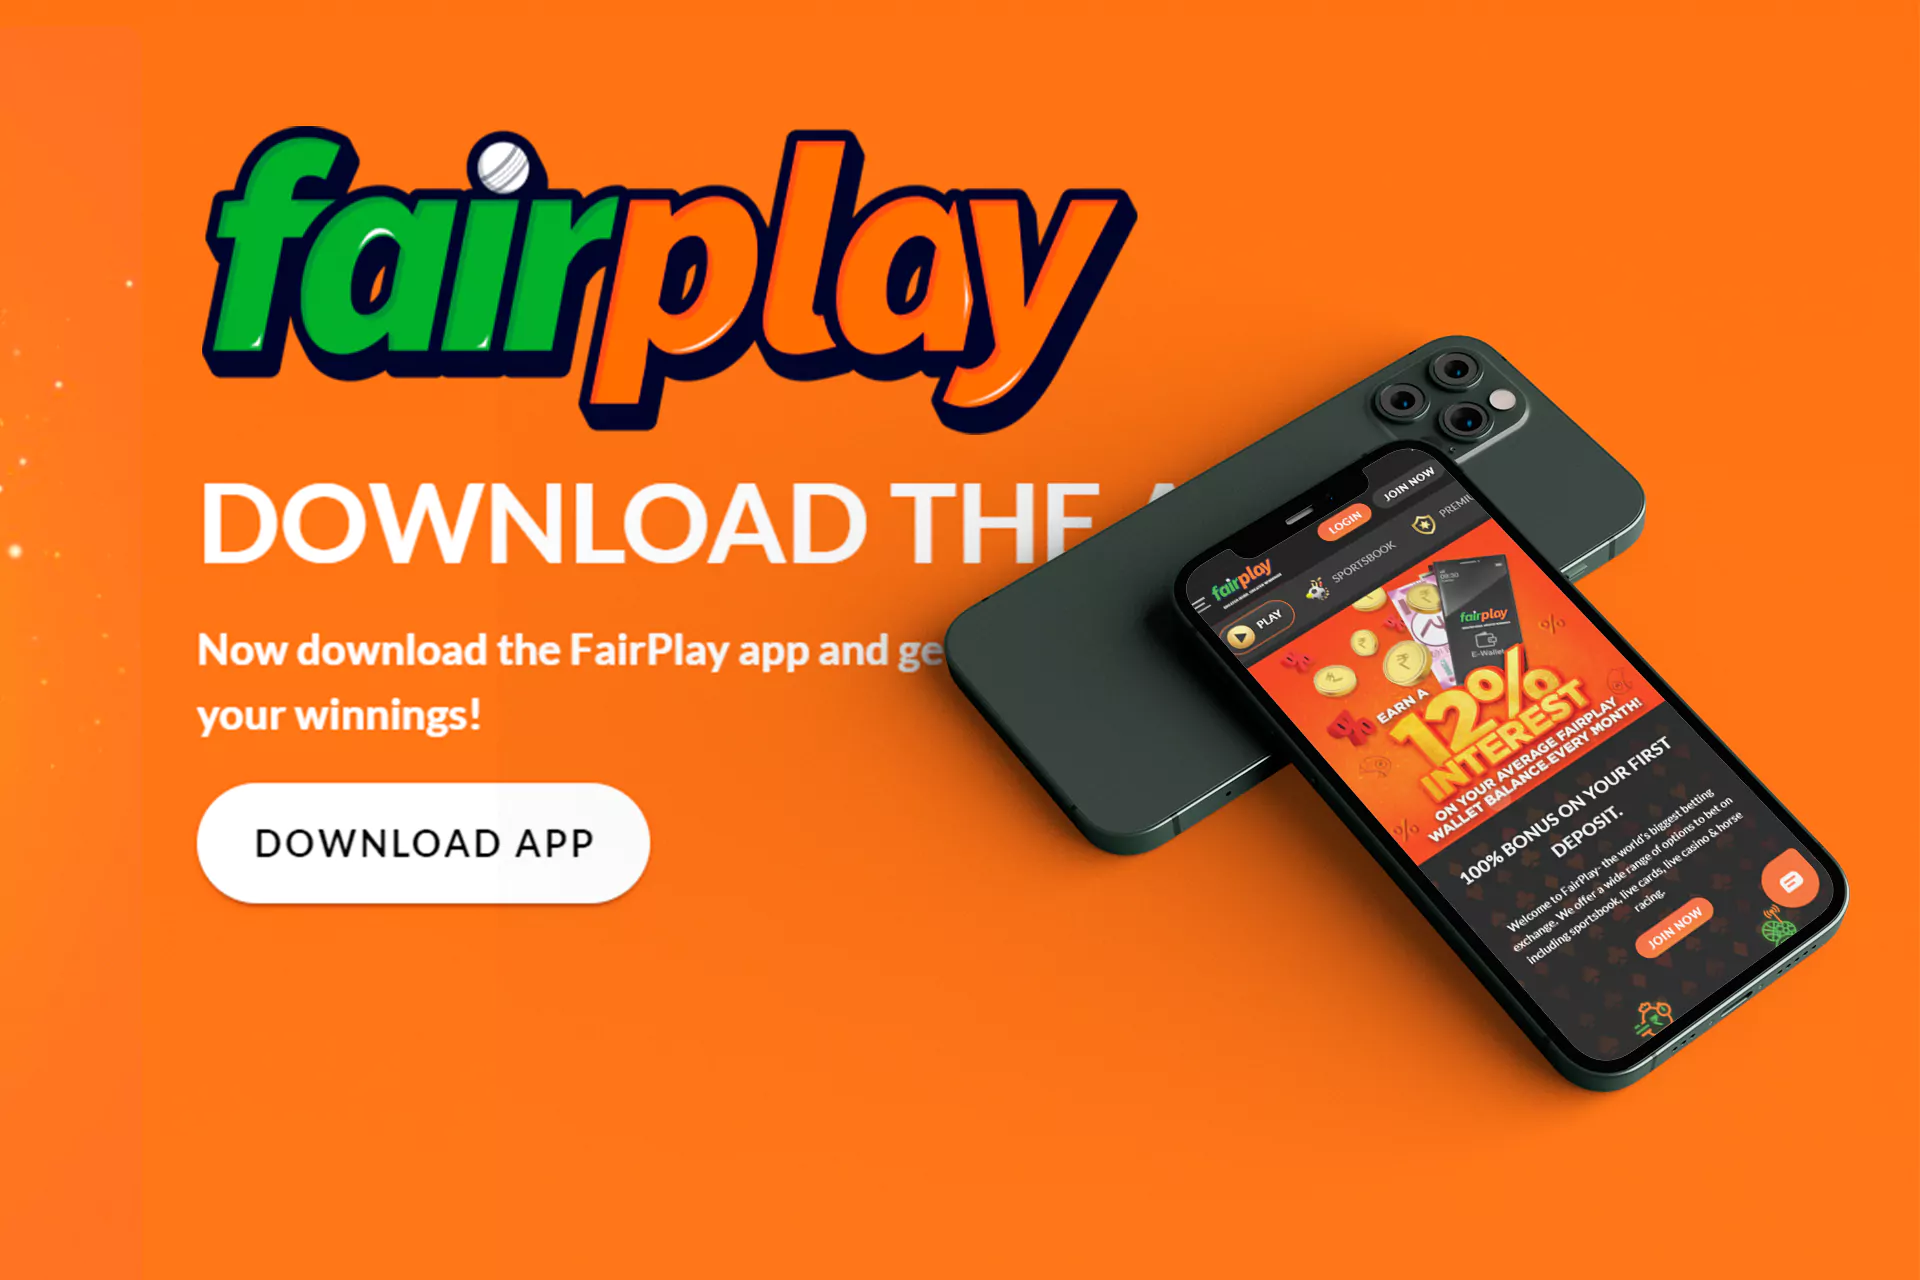 You can install the app on your iPhone and start betting at Fairplay in.